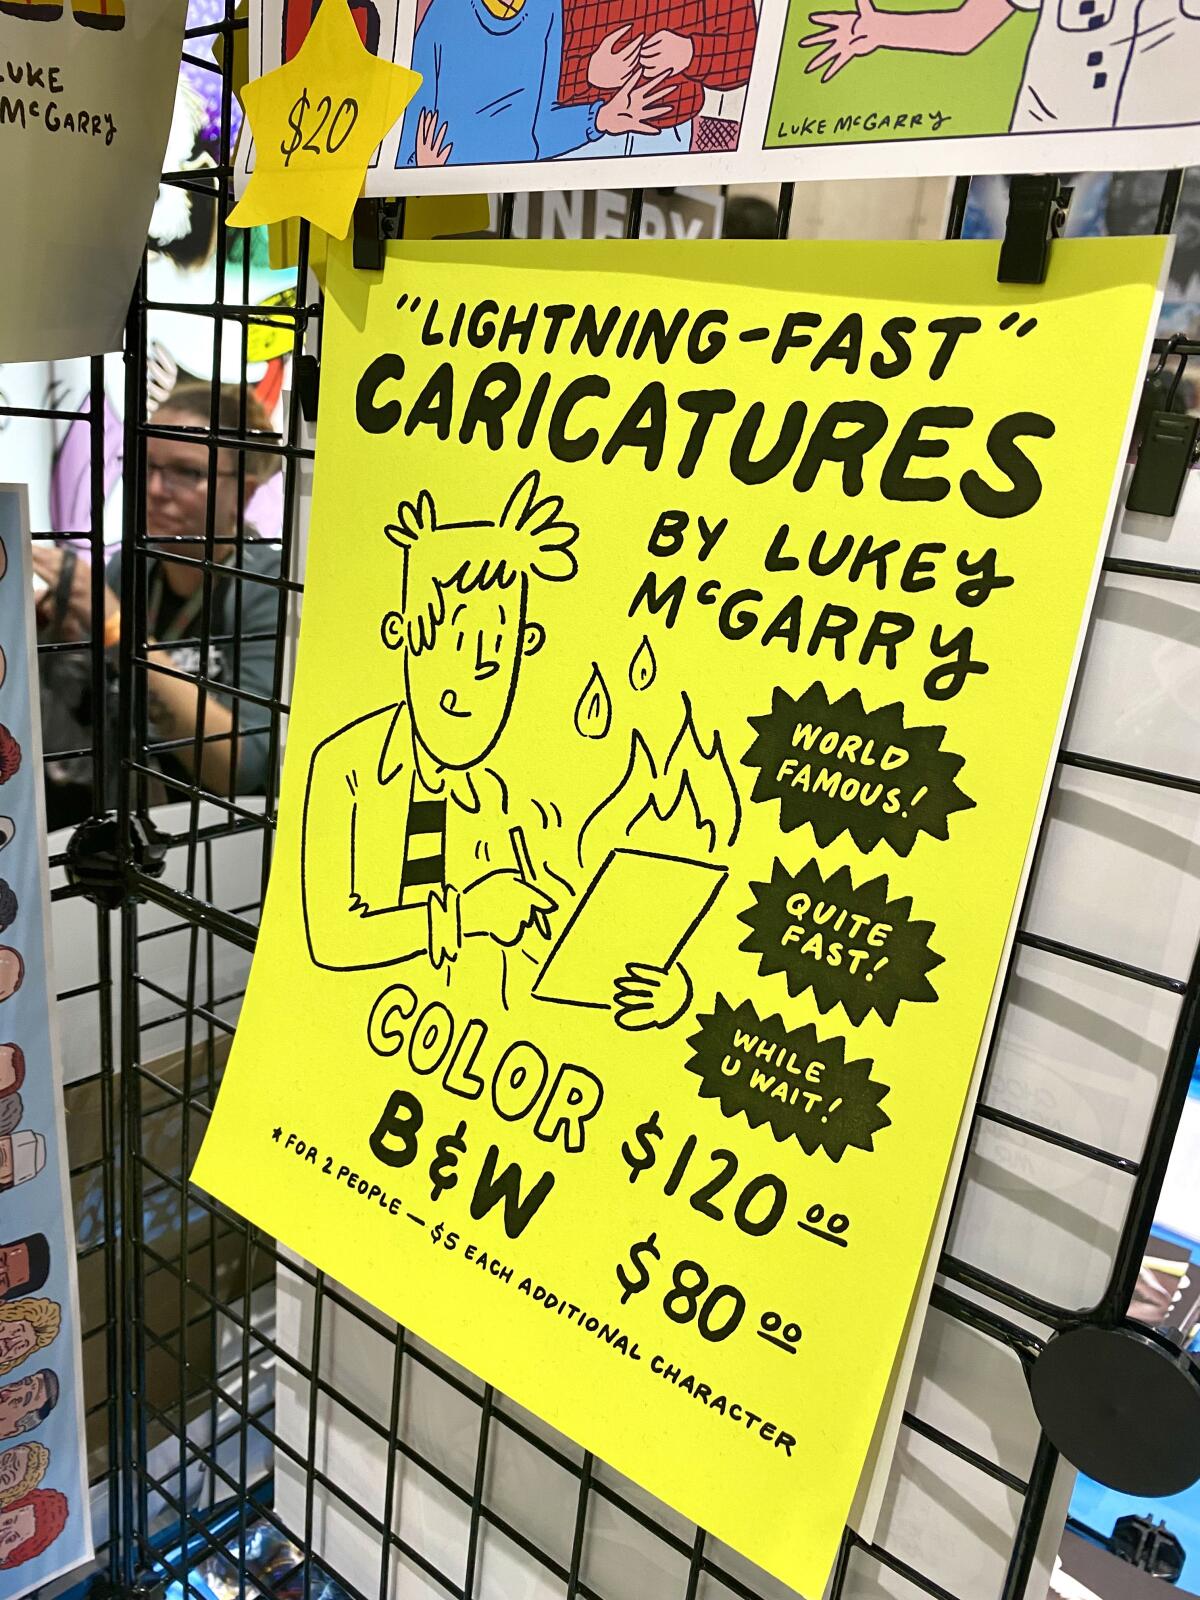 A sign for "Lightning-Fast" Caricatures by Luke McGarry at the cartoonist's booth at Comic-Con.